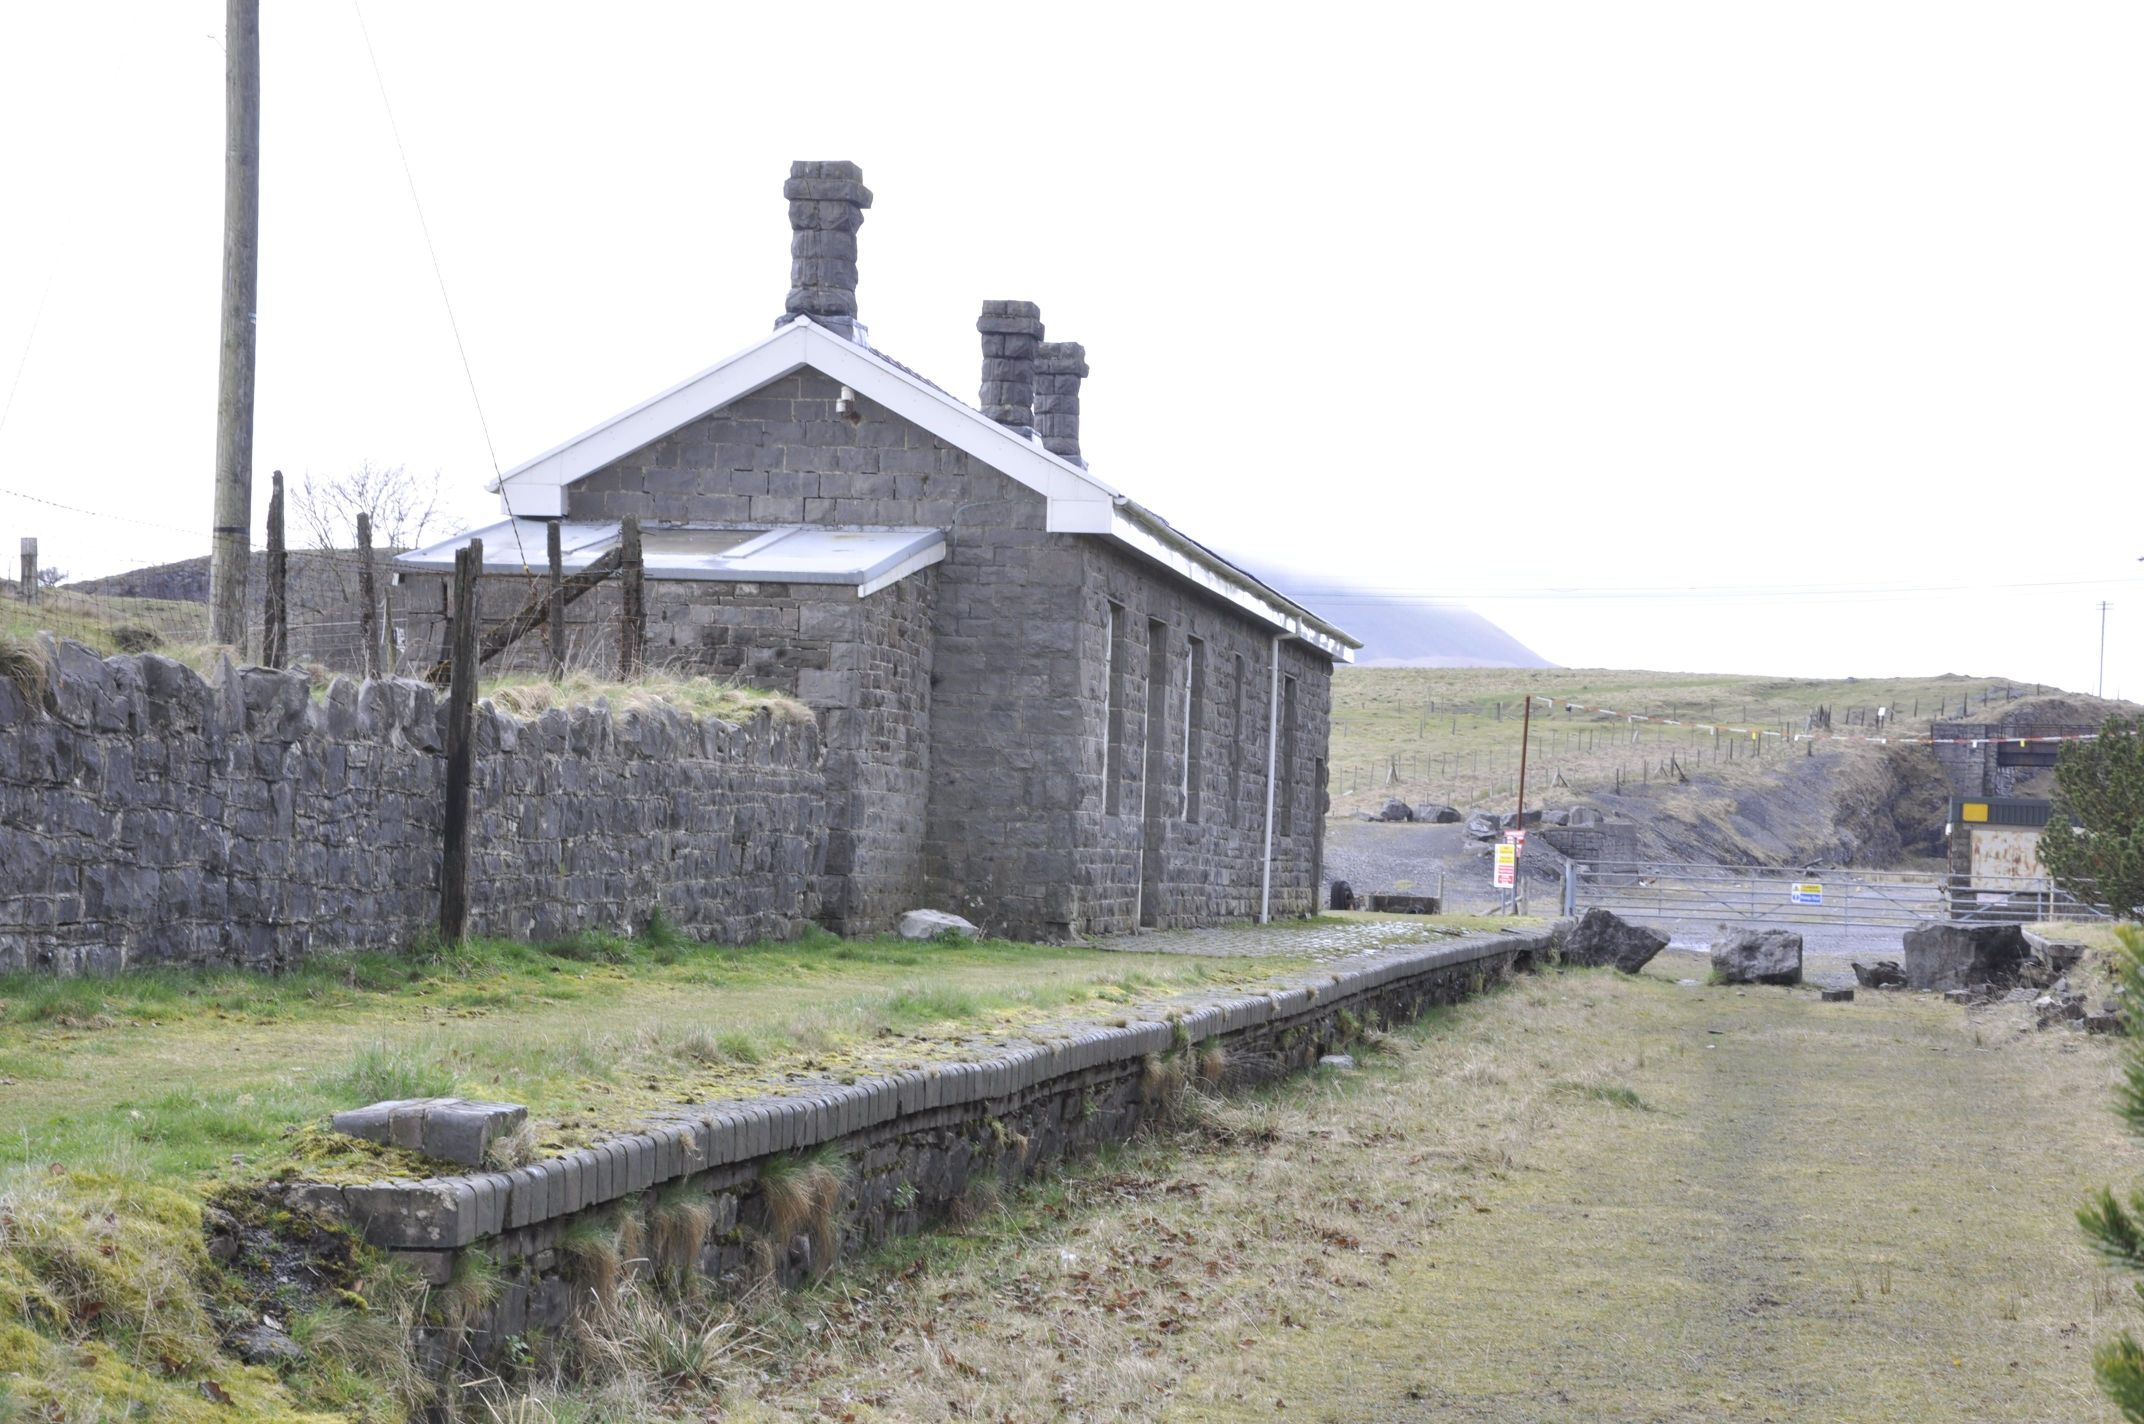  old railway station at Penwyllt, photograph by Grey Wolf Web Design